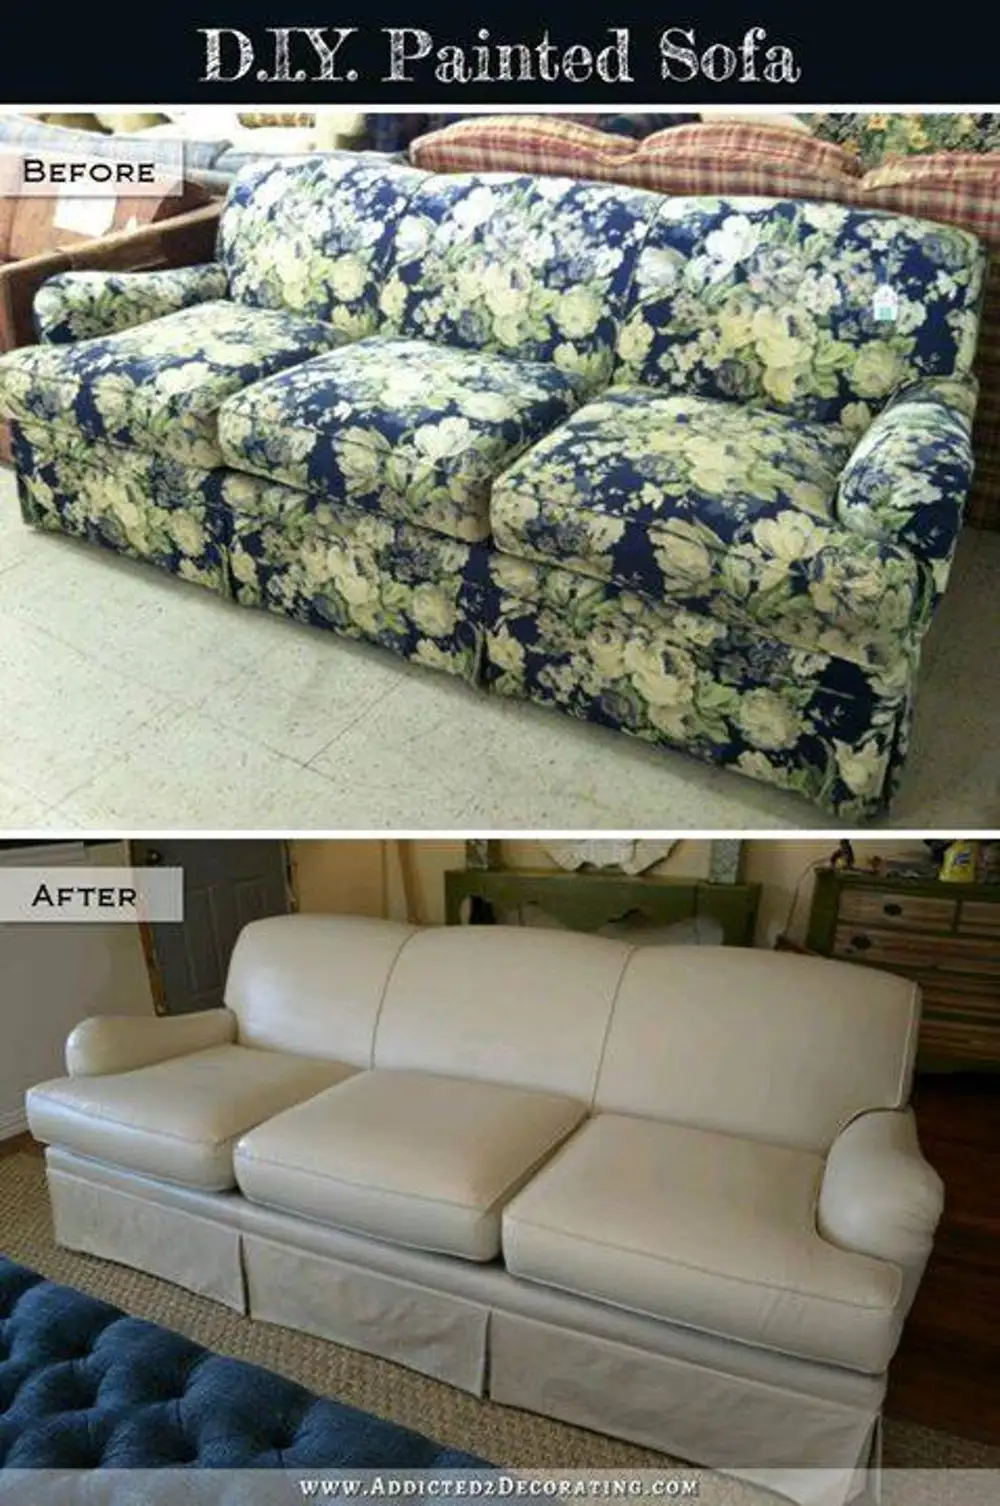 Sofa before after